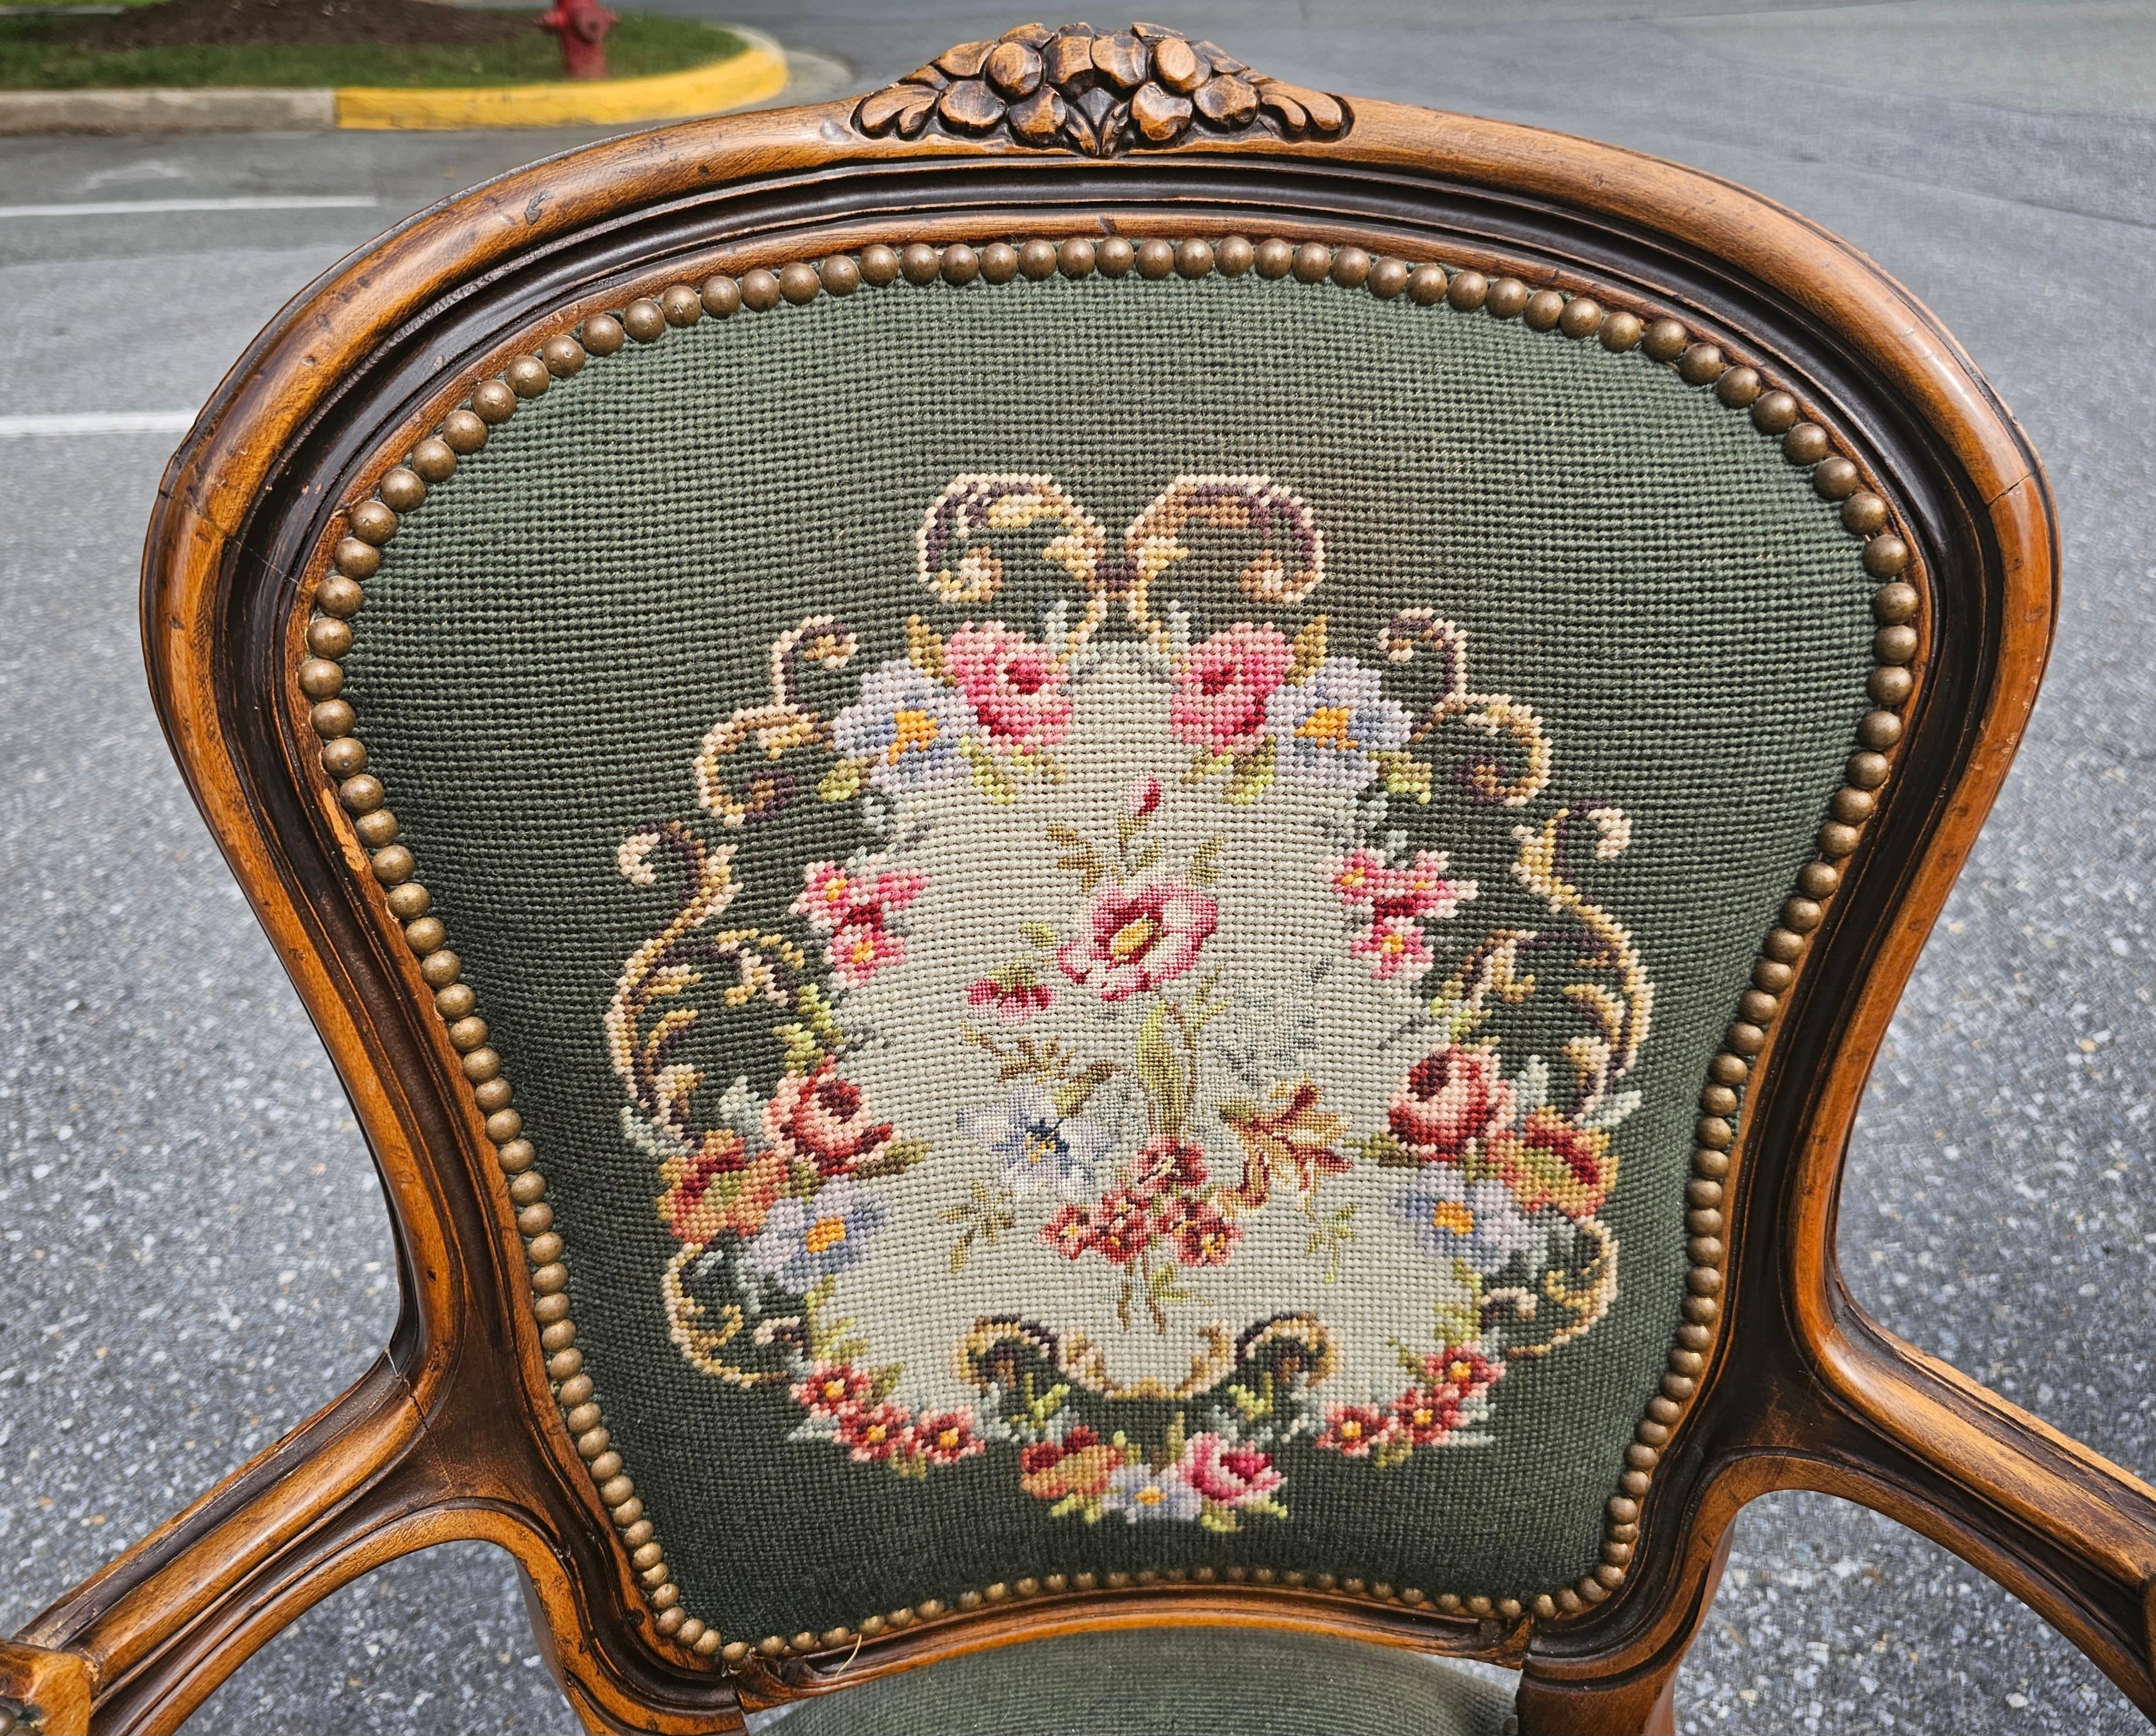 Beautiful Pair of French Louis XVI Carved Fruitwood and Needlepoint Upholstered Bergeres. Very good vintage condition with firm seats. Dark green with minor fading. Listing price for the pair